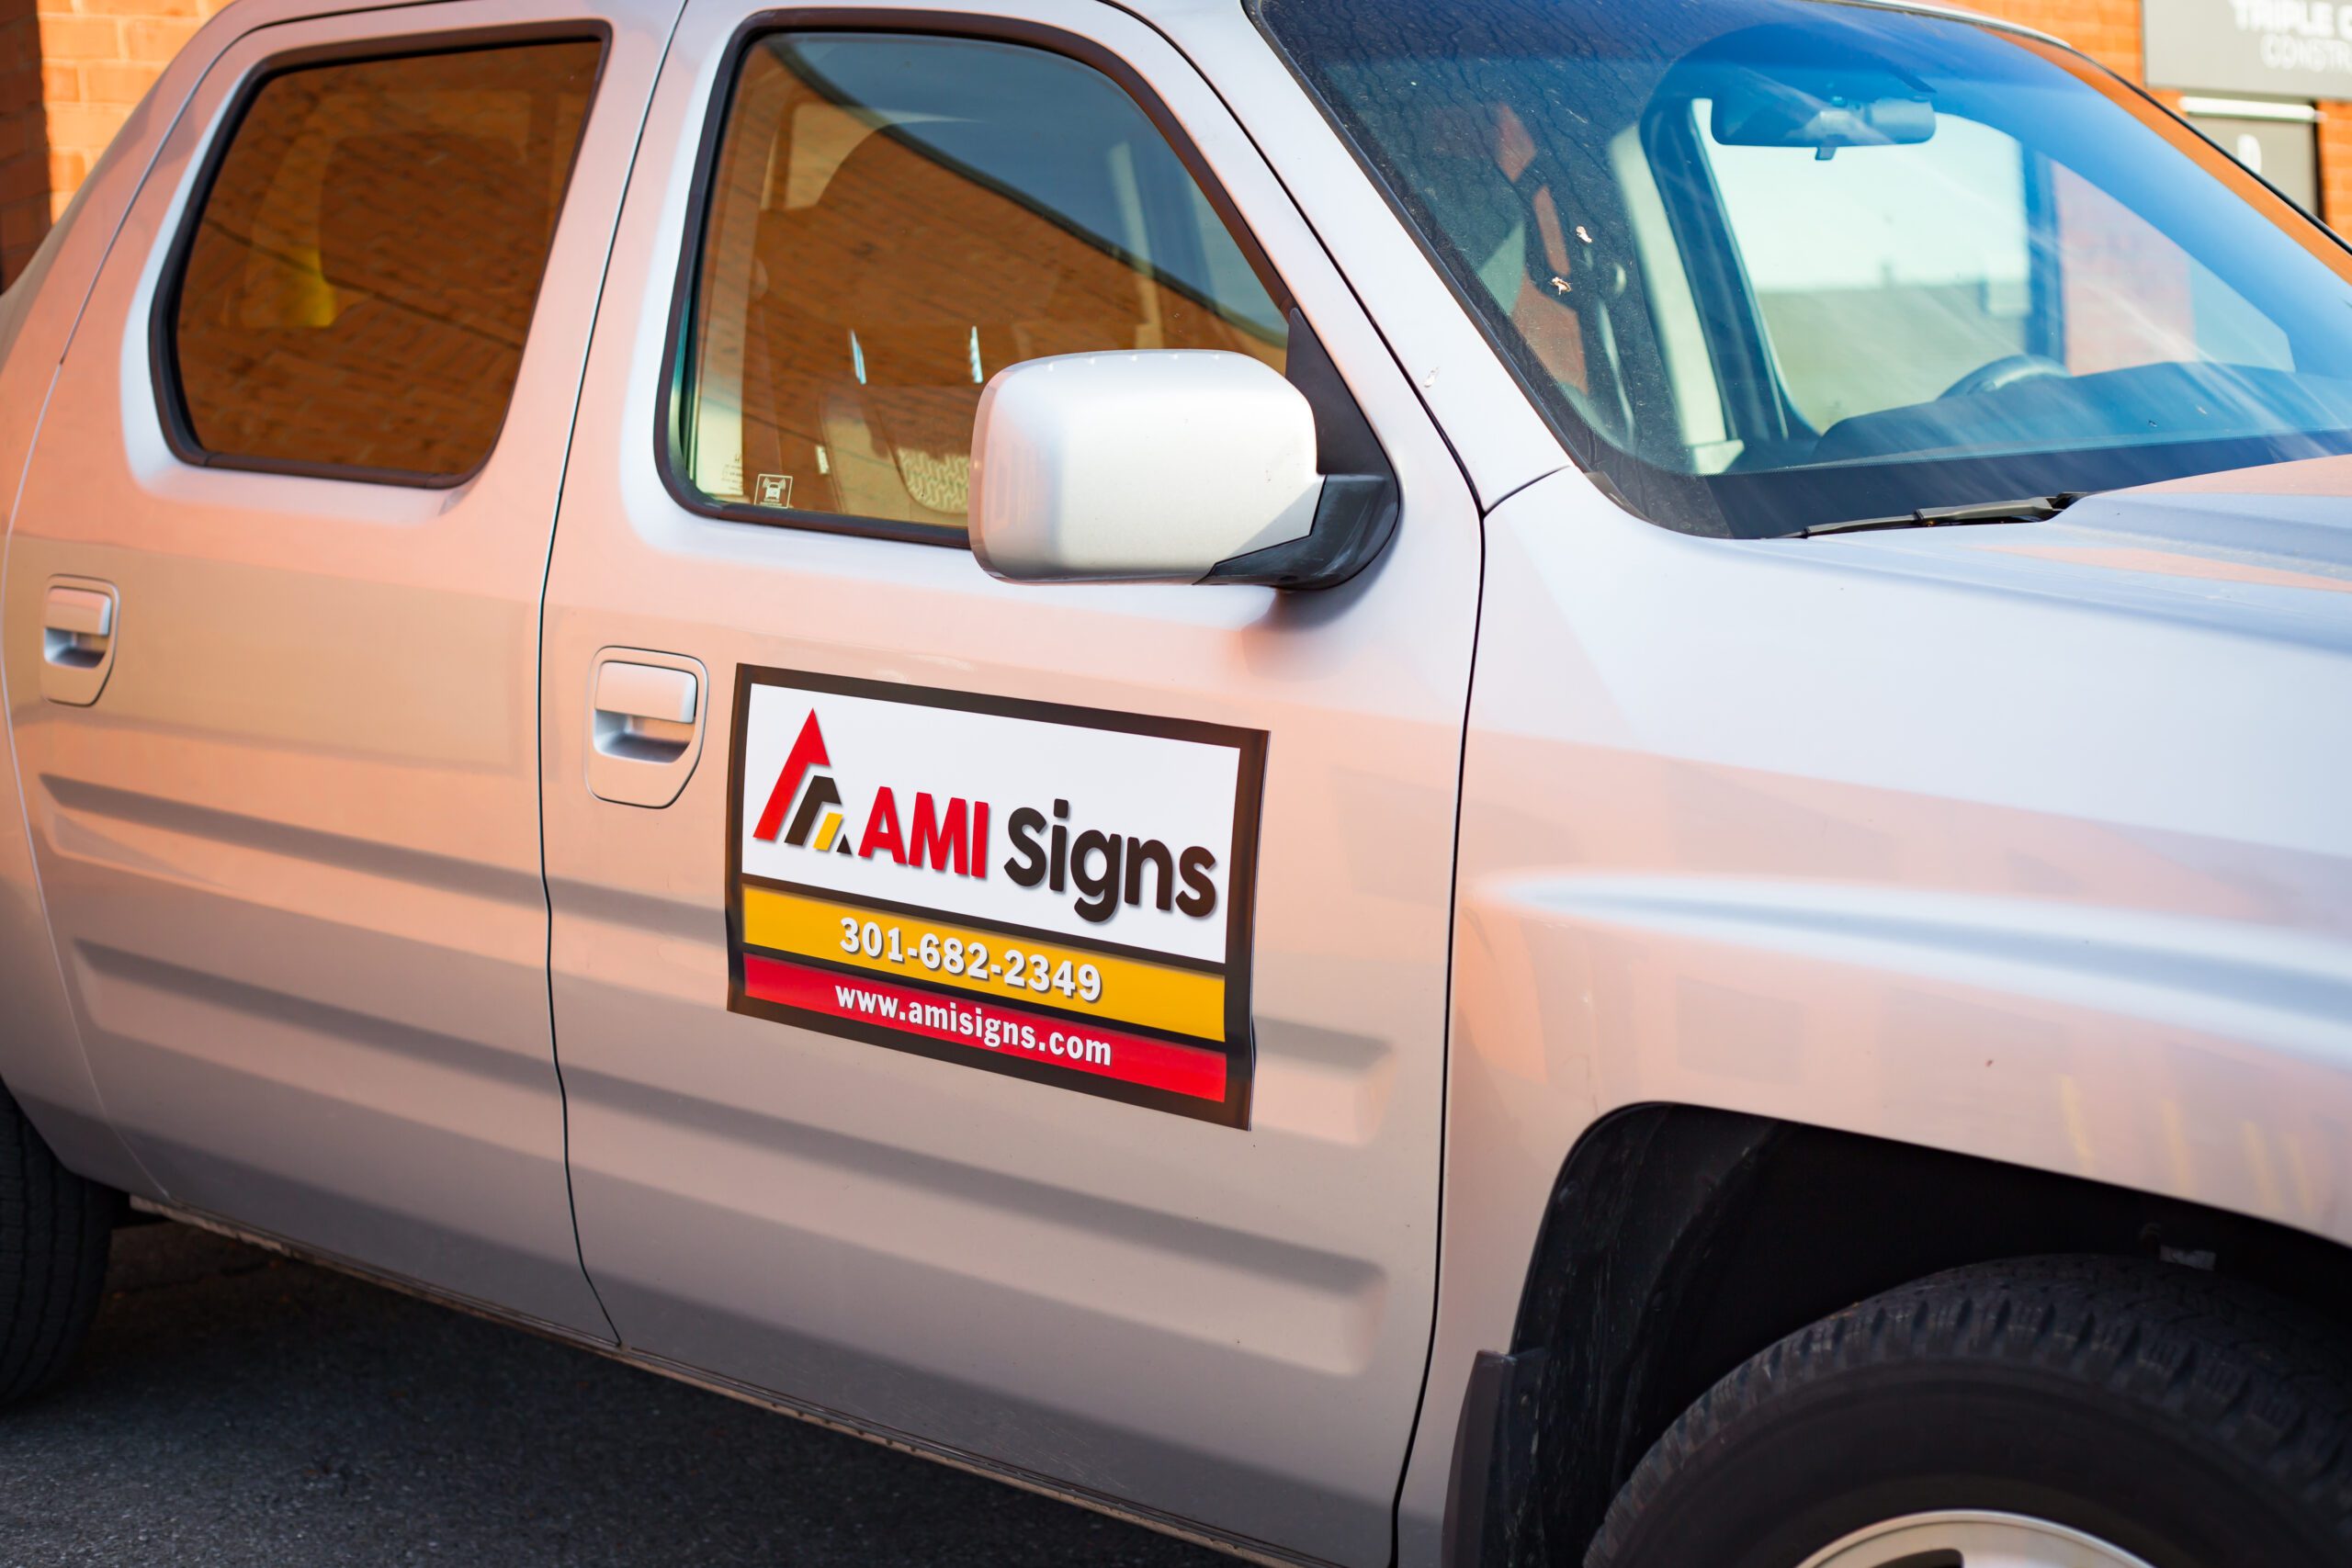 Ami Signs Carmagnet 3 Scaled